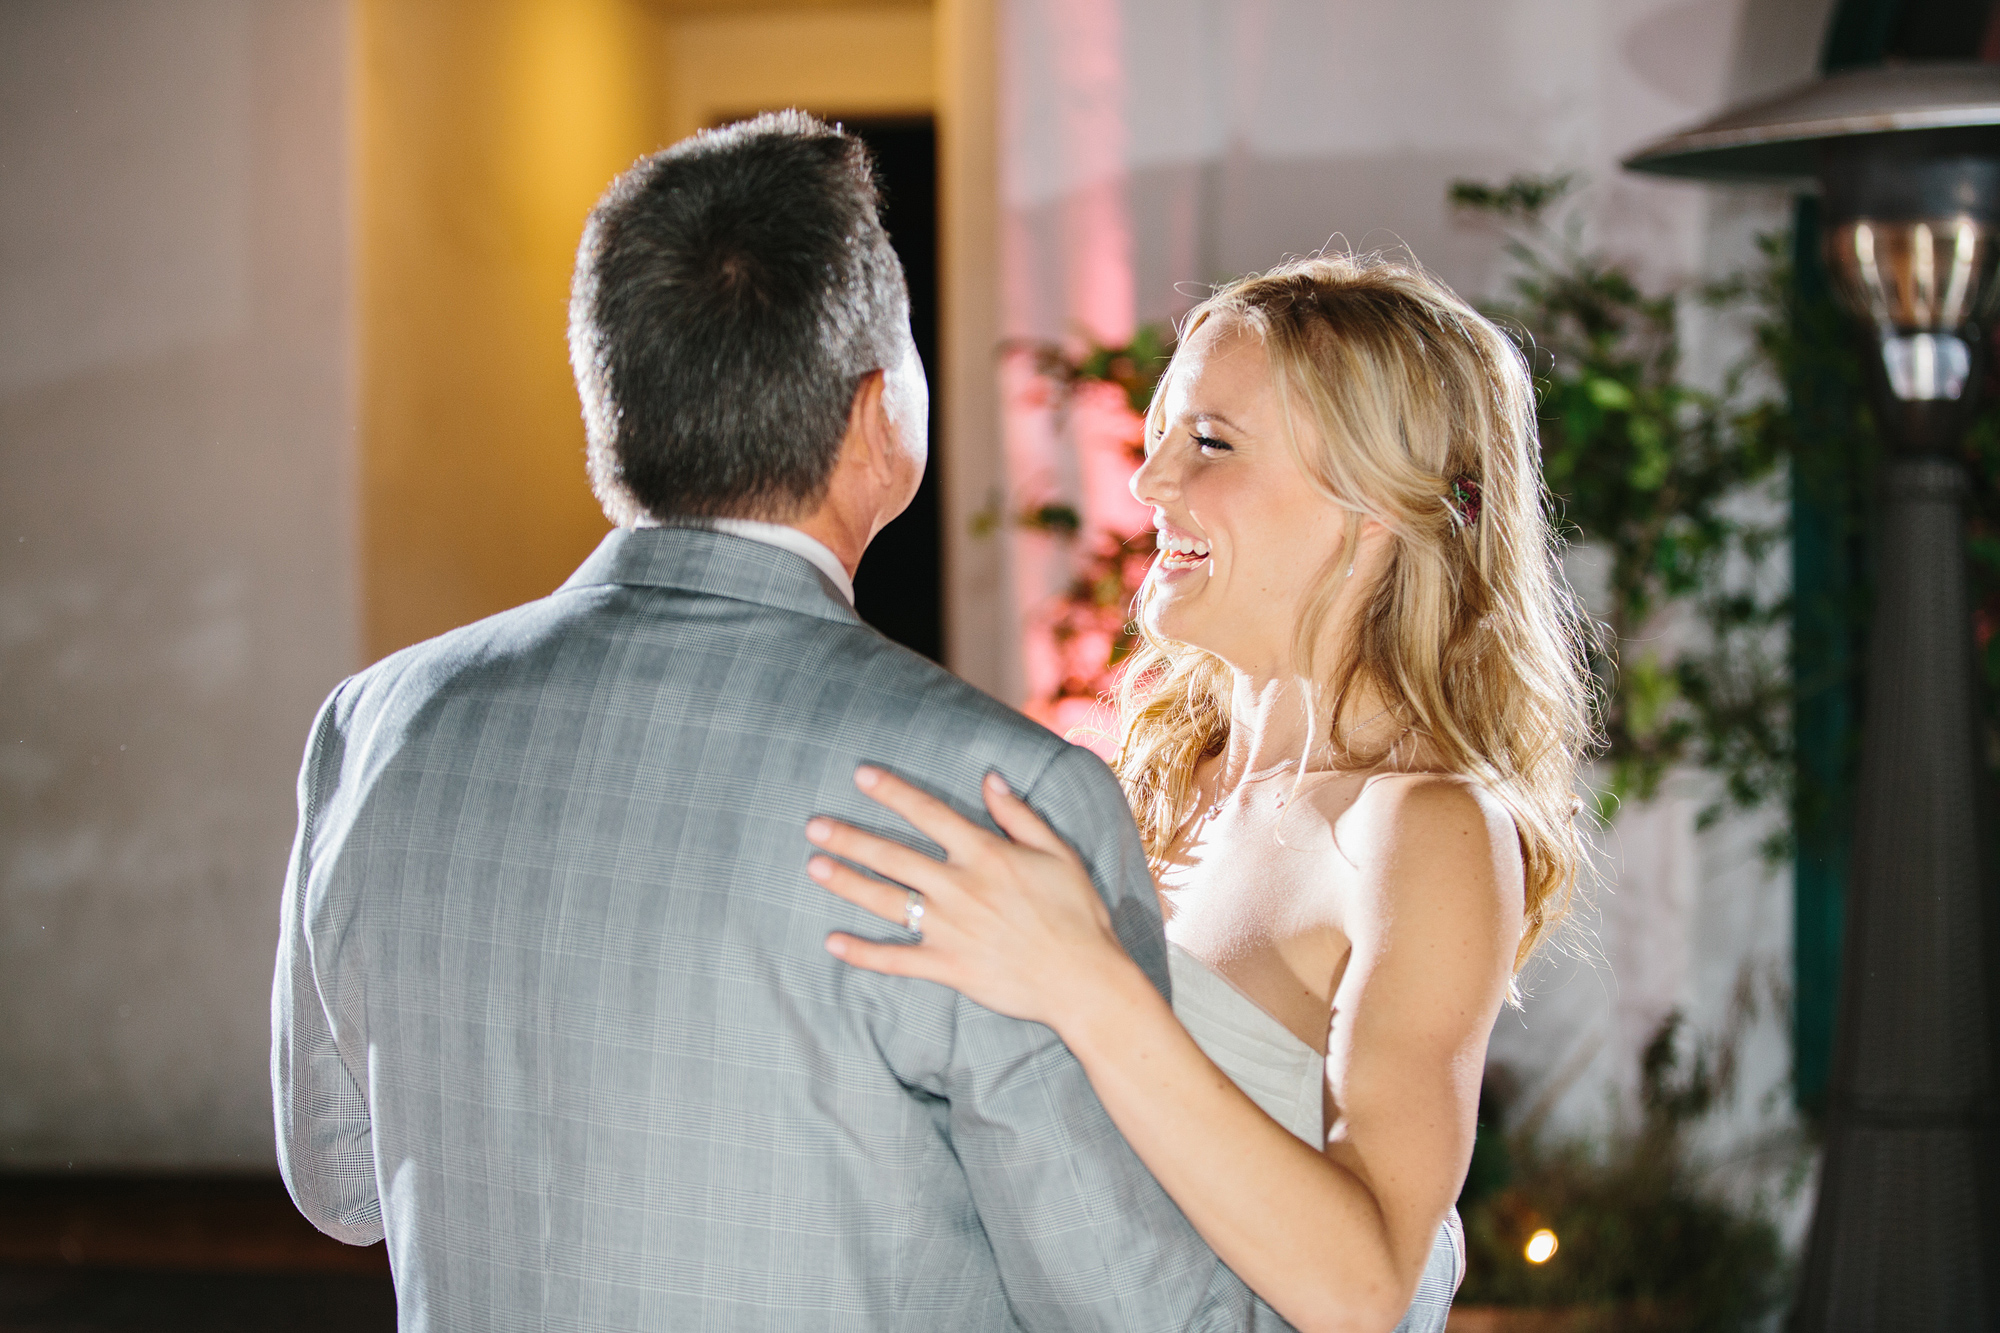 The bride's special father daughter dance. 